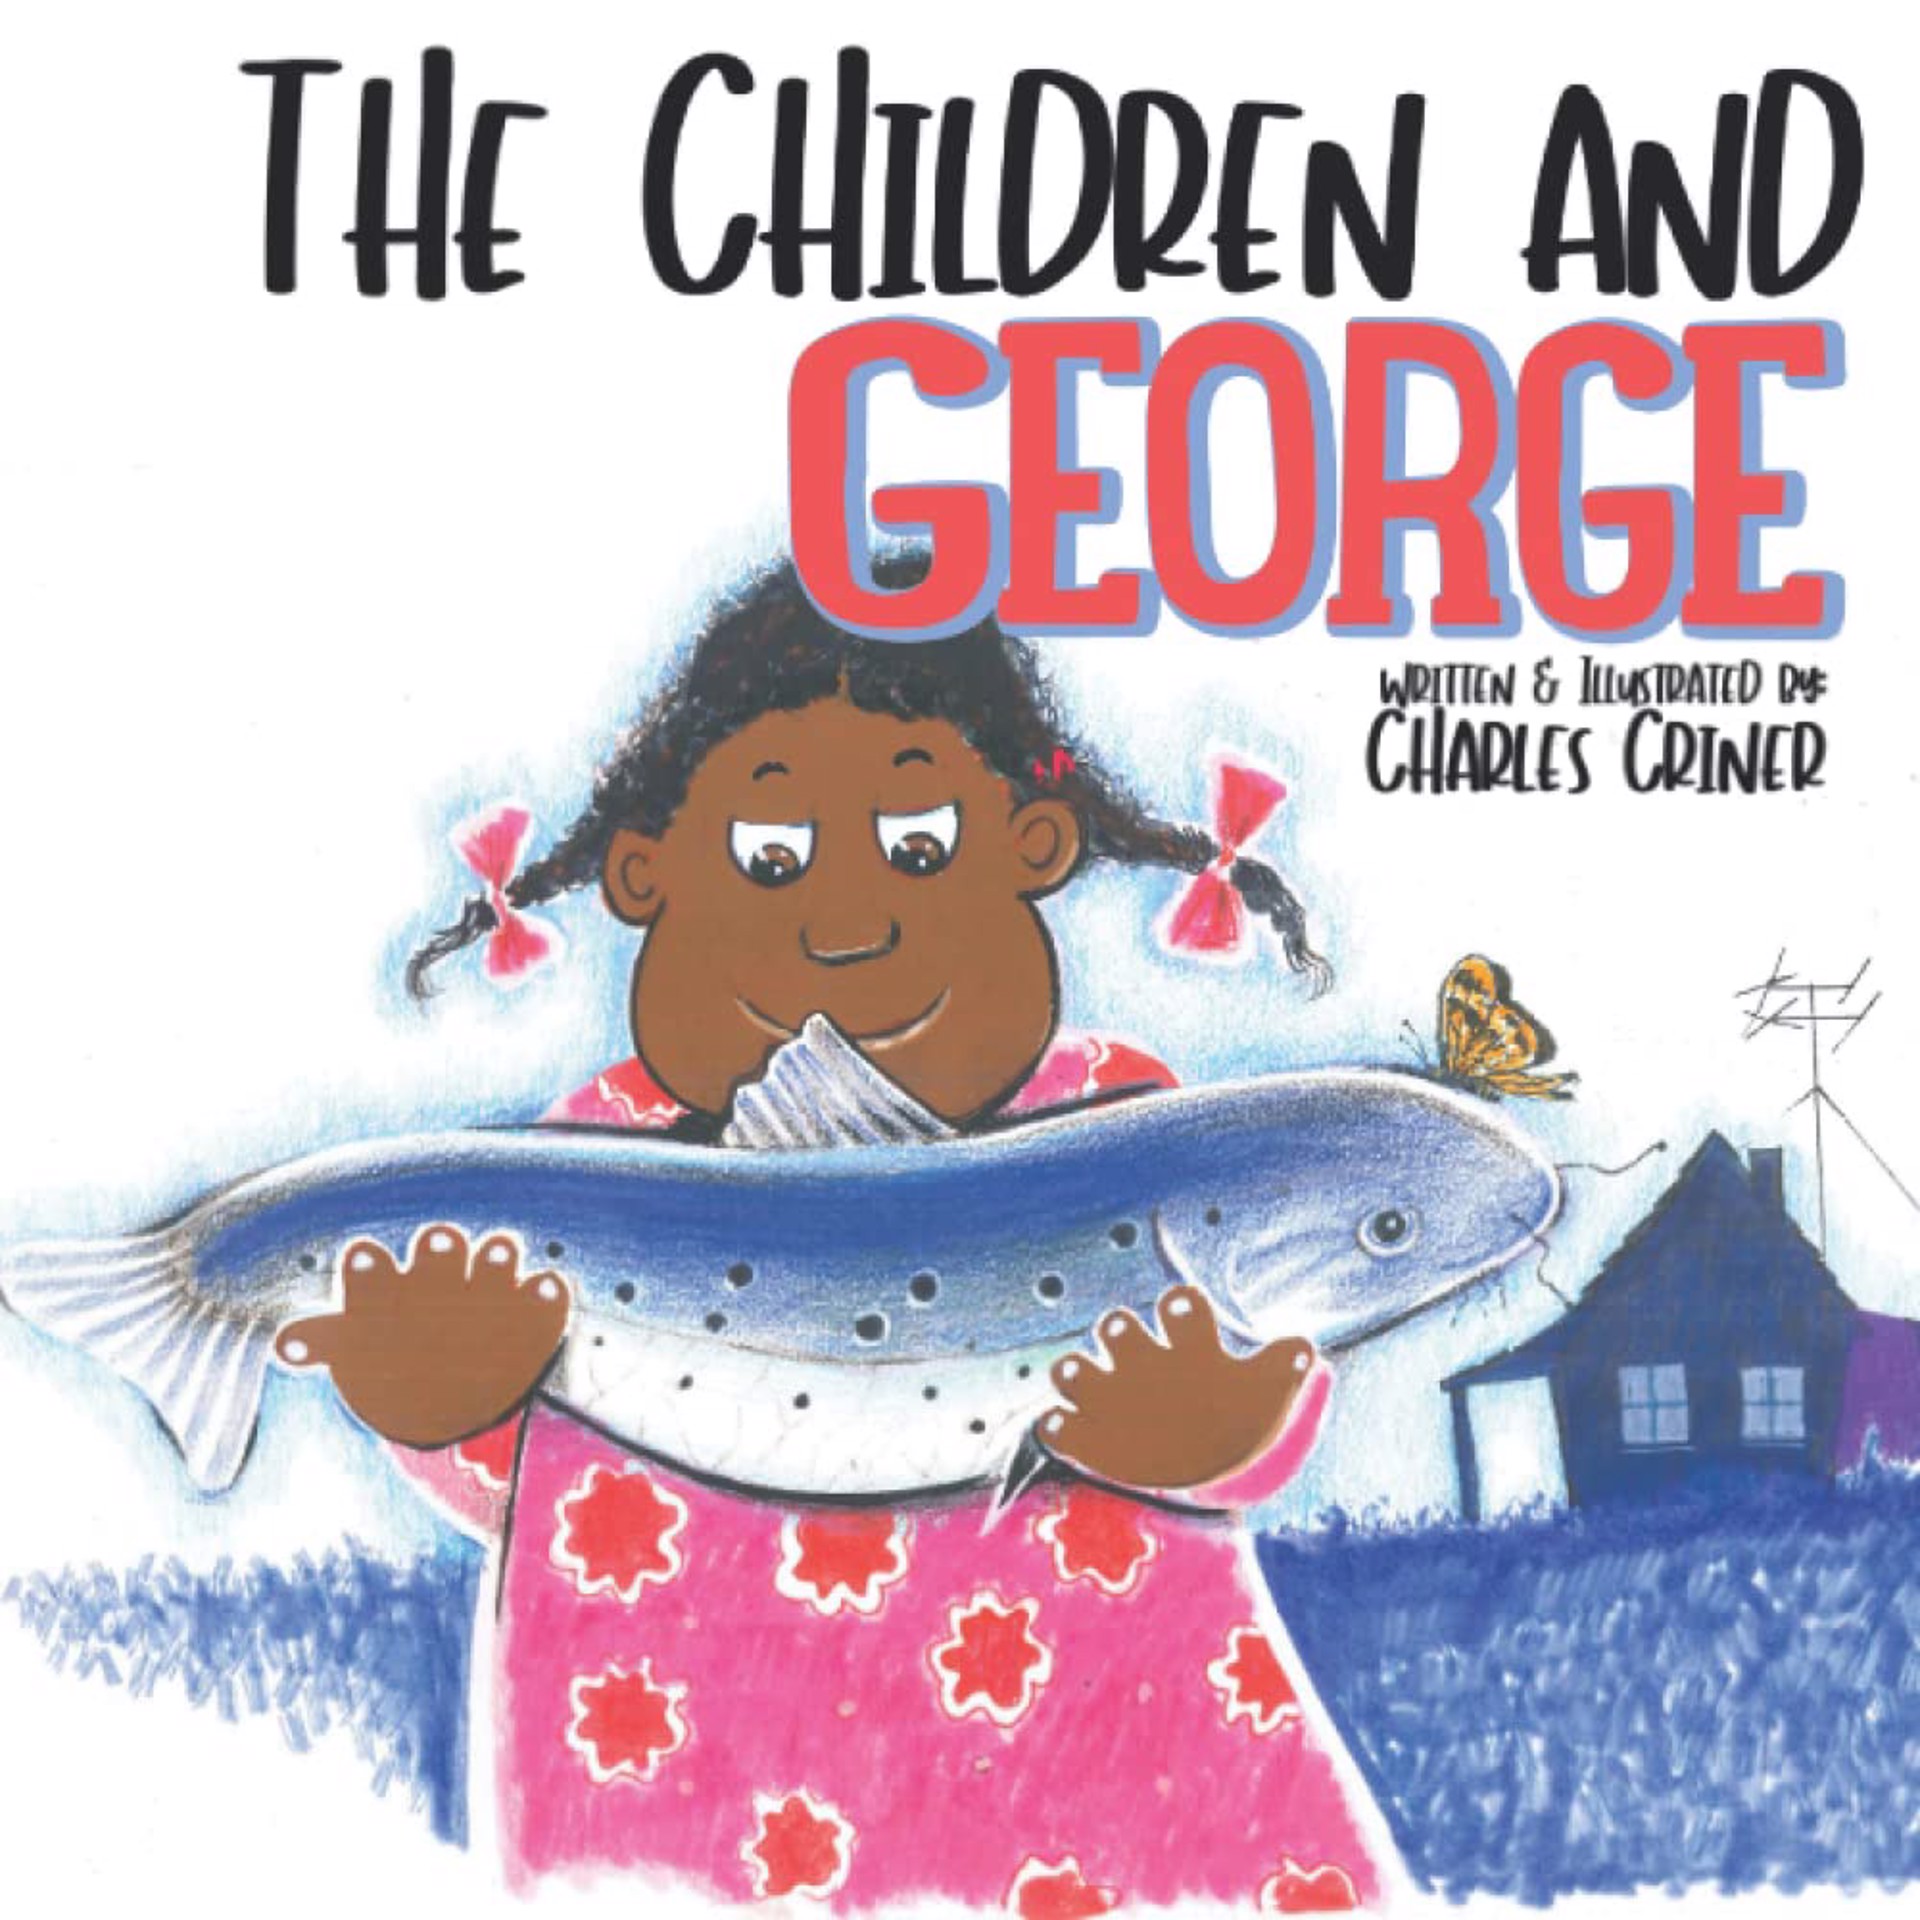 The Children and George by Charles Criner by Publications